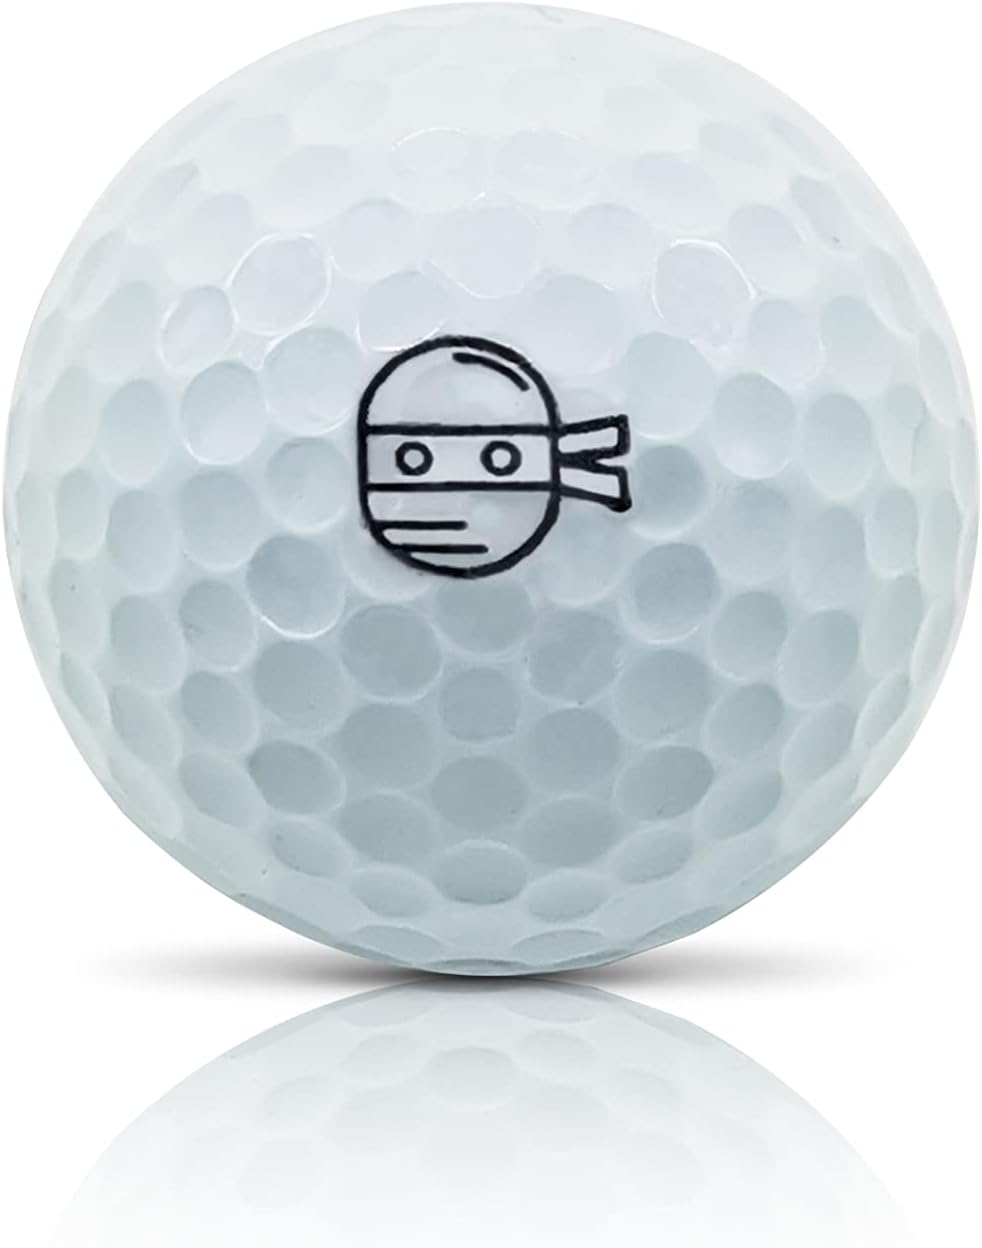 SWVL Sports Golf Ball Stamp Marker Multiple Designs Faces, Emojis Icons  More